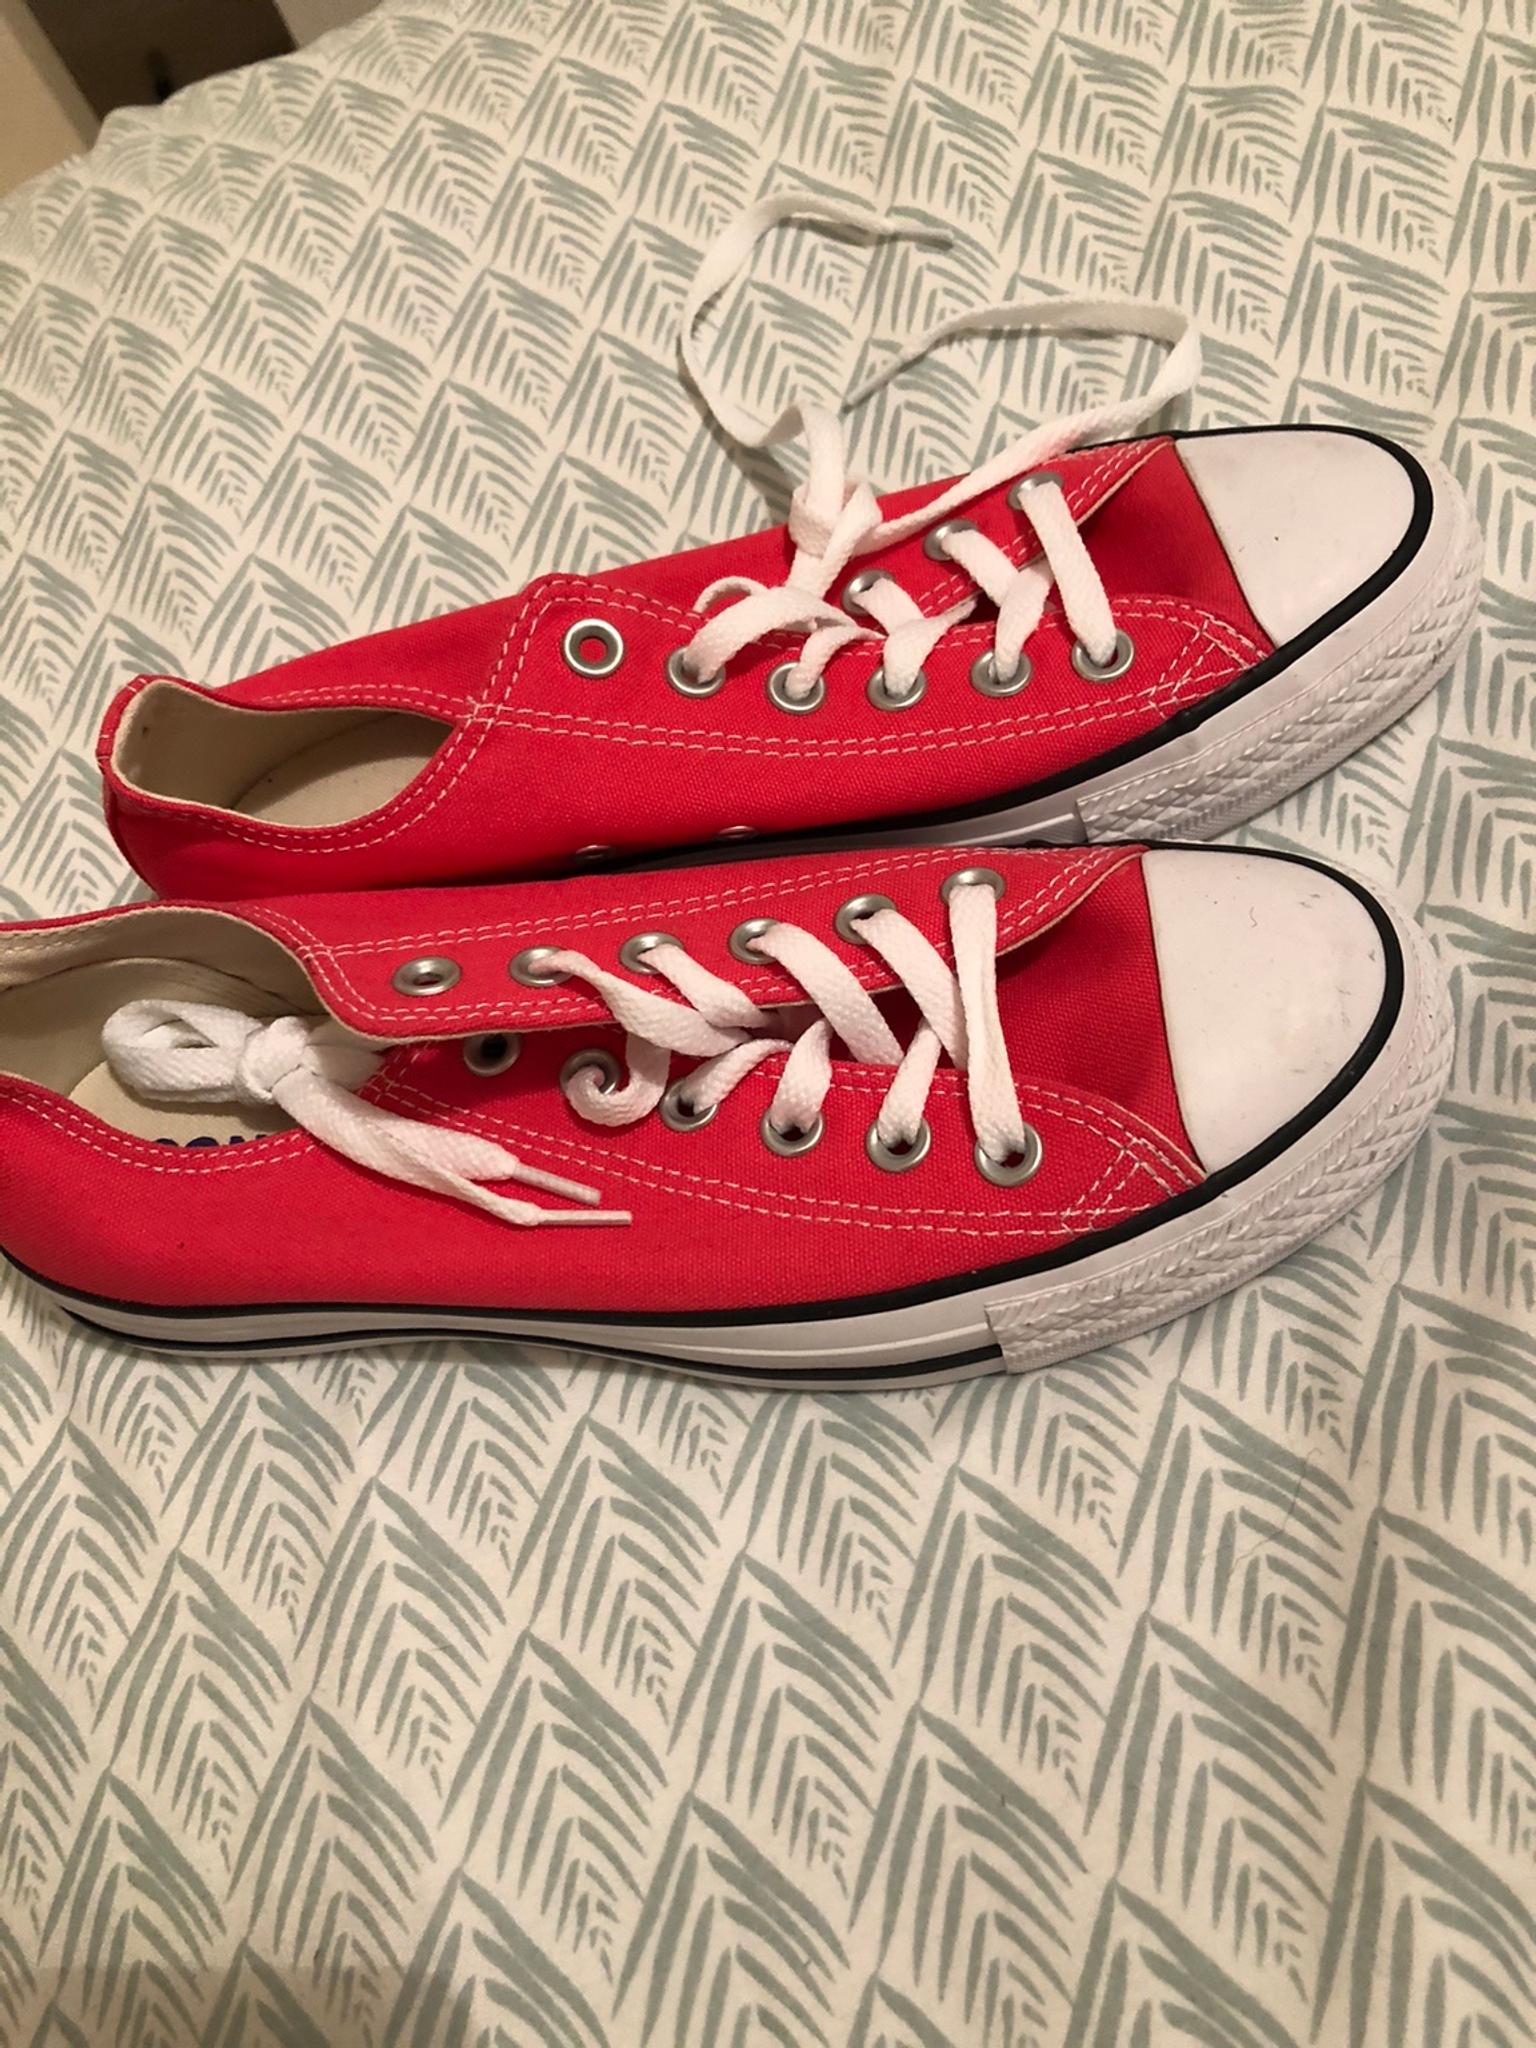 converse trainers size 5.5 uk